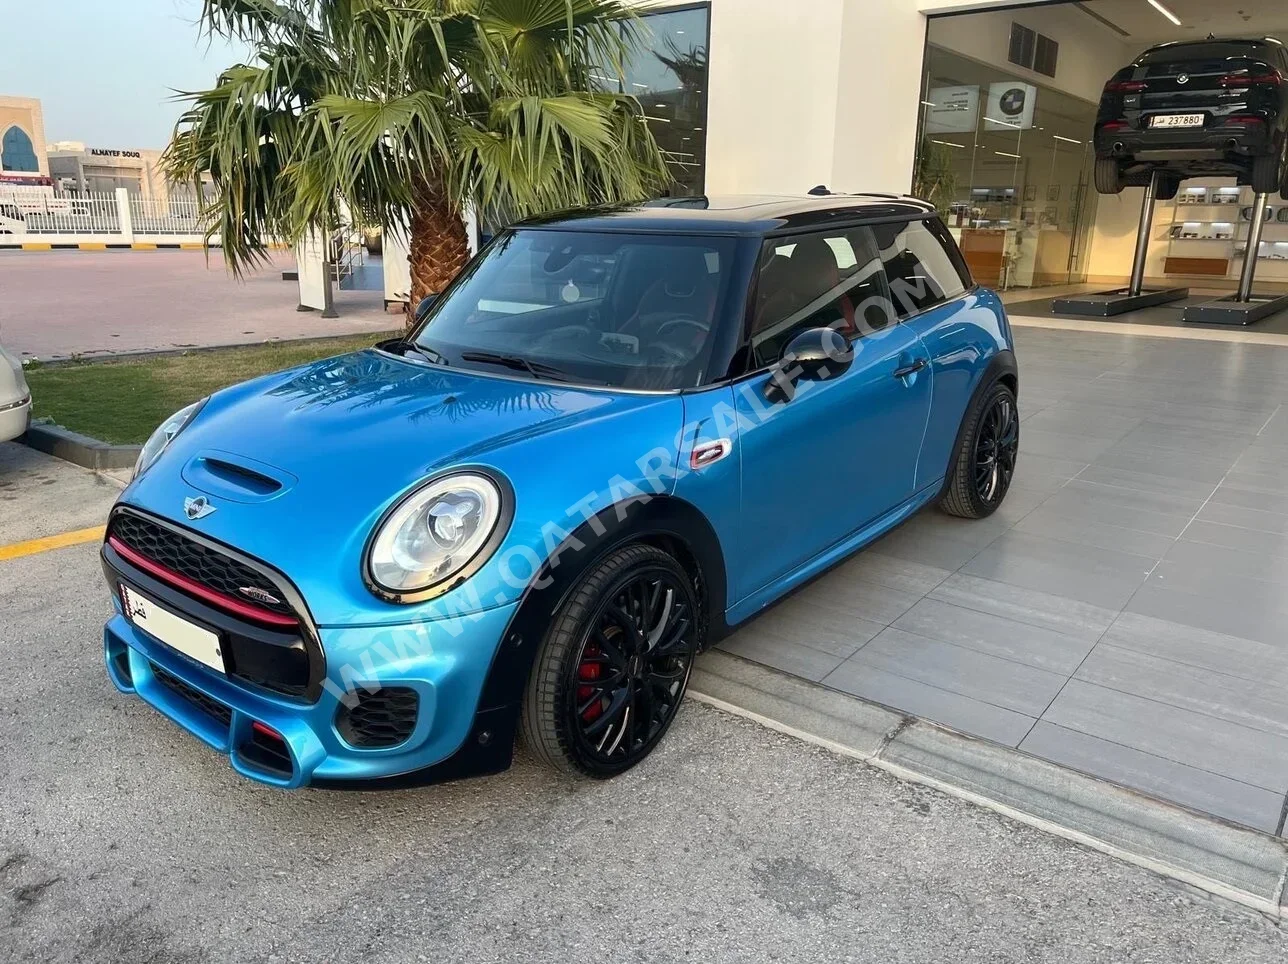 Mini  Cooper  JCW  2017  Automatic  53,000 Km  4 Cylinder  Front Wheel Drive (FWD)  Hatchback  Blue